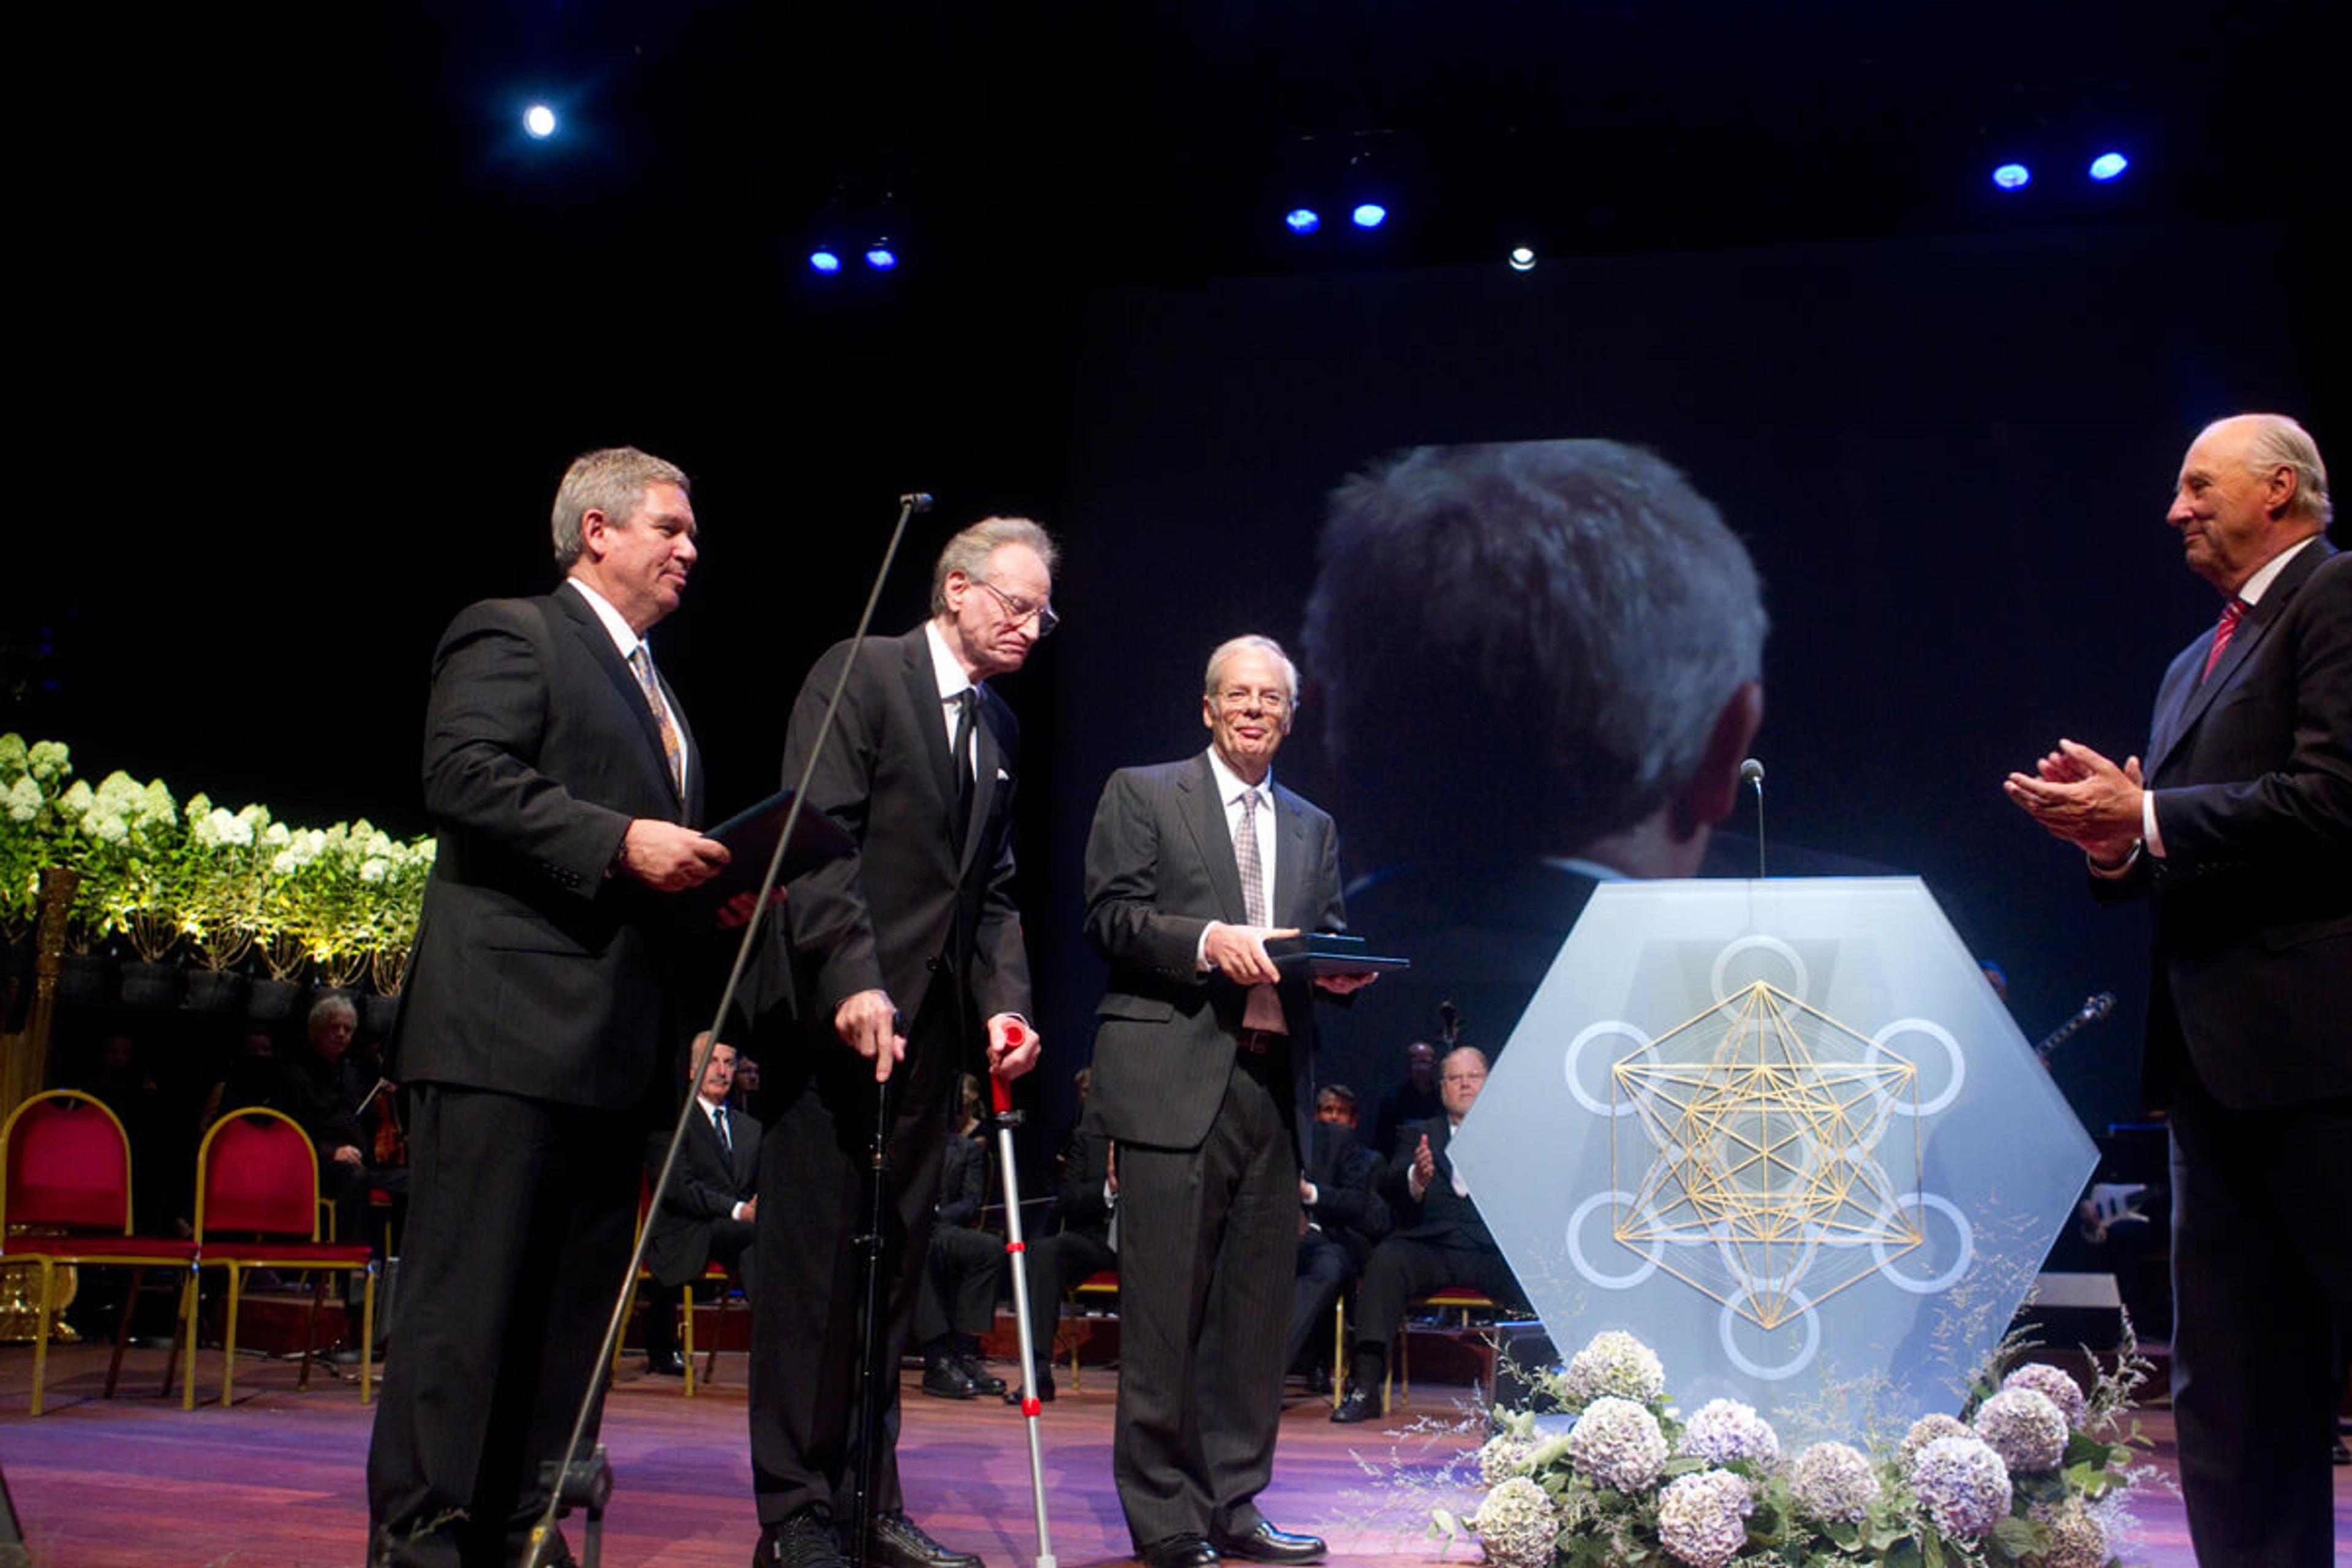 His Majesty King Harald of Norway presents the Kavli Prize in Astrophysics. 